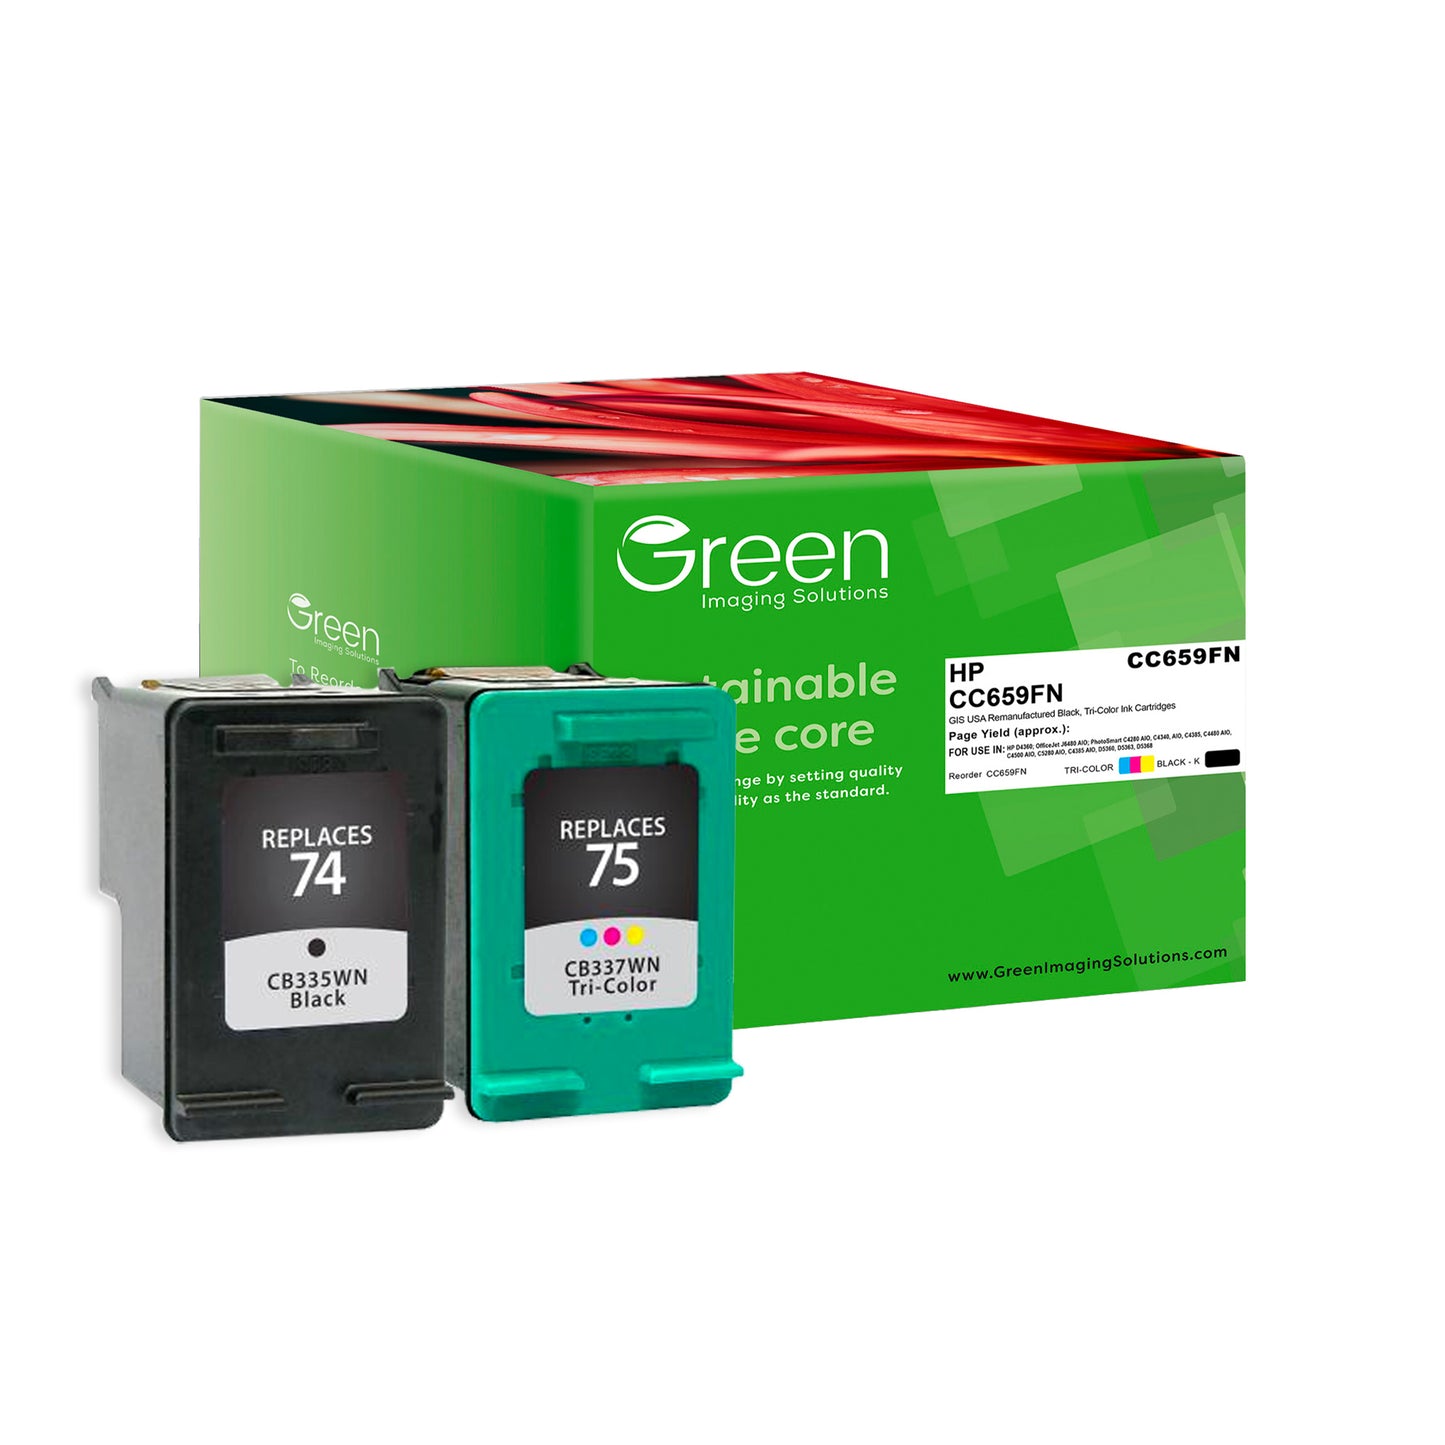 Green Imaging Solutions USA Remanufactured Black, Tri-Color Ink Cartridges for HP 74/75 (CC659FN)